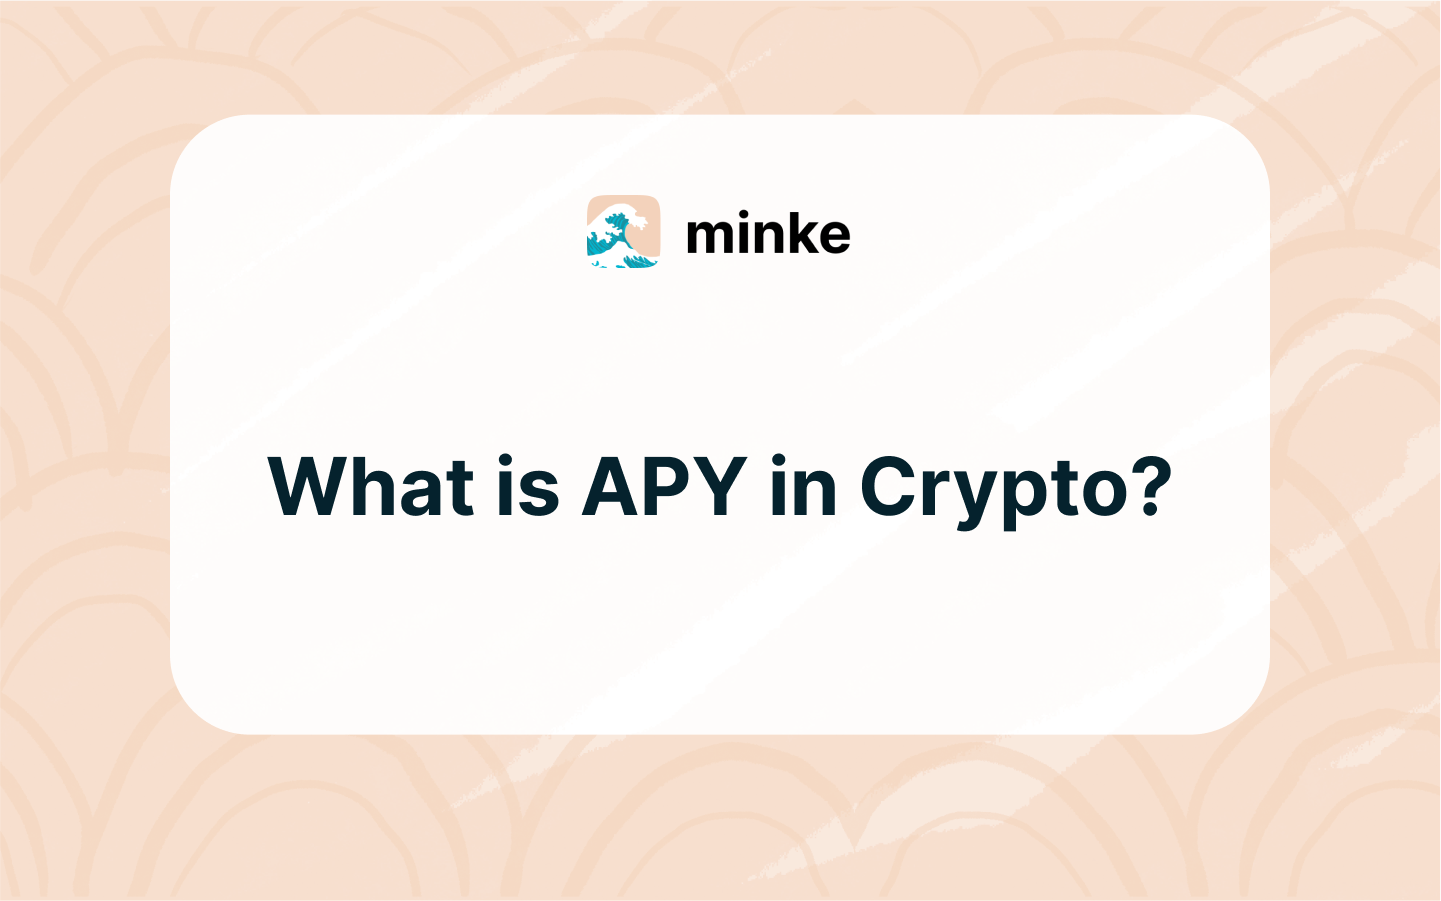 what is apy in crypto?